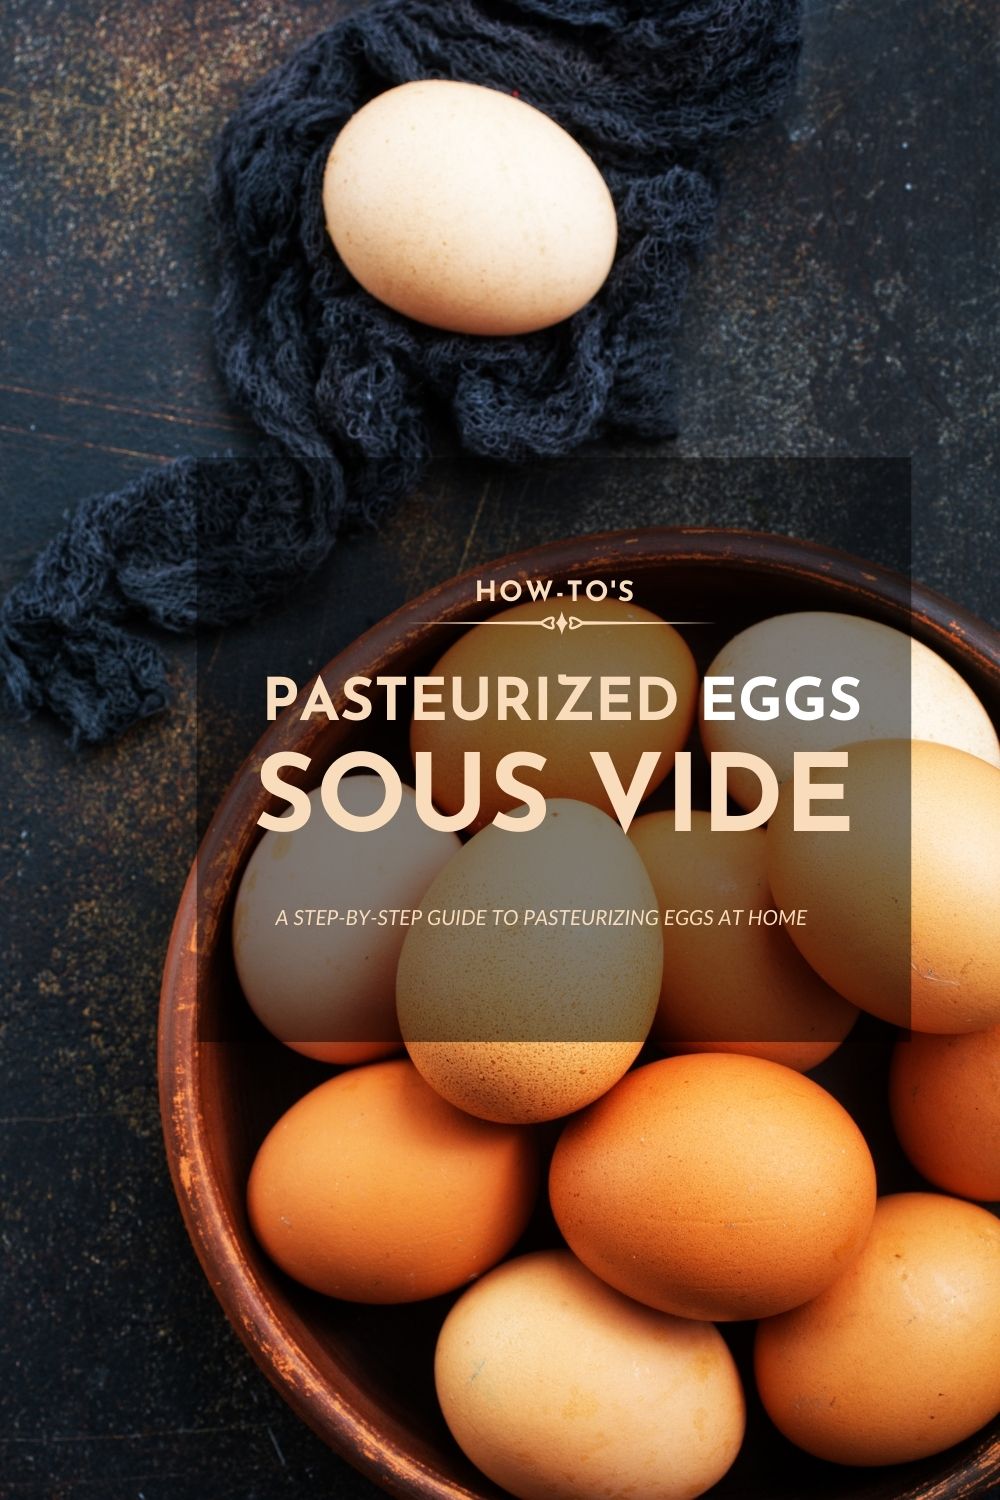 How to Pasteurize Eggs Sous Vide (Step by Step Directions)